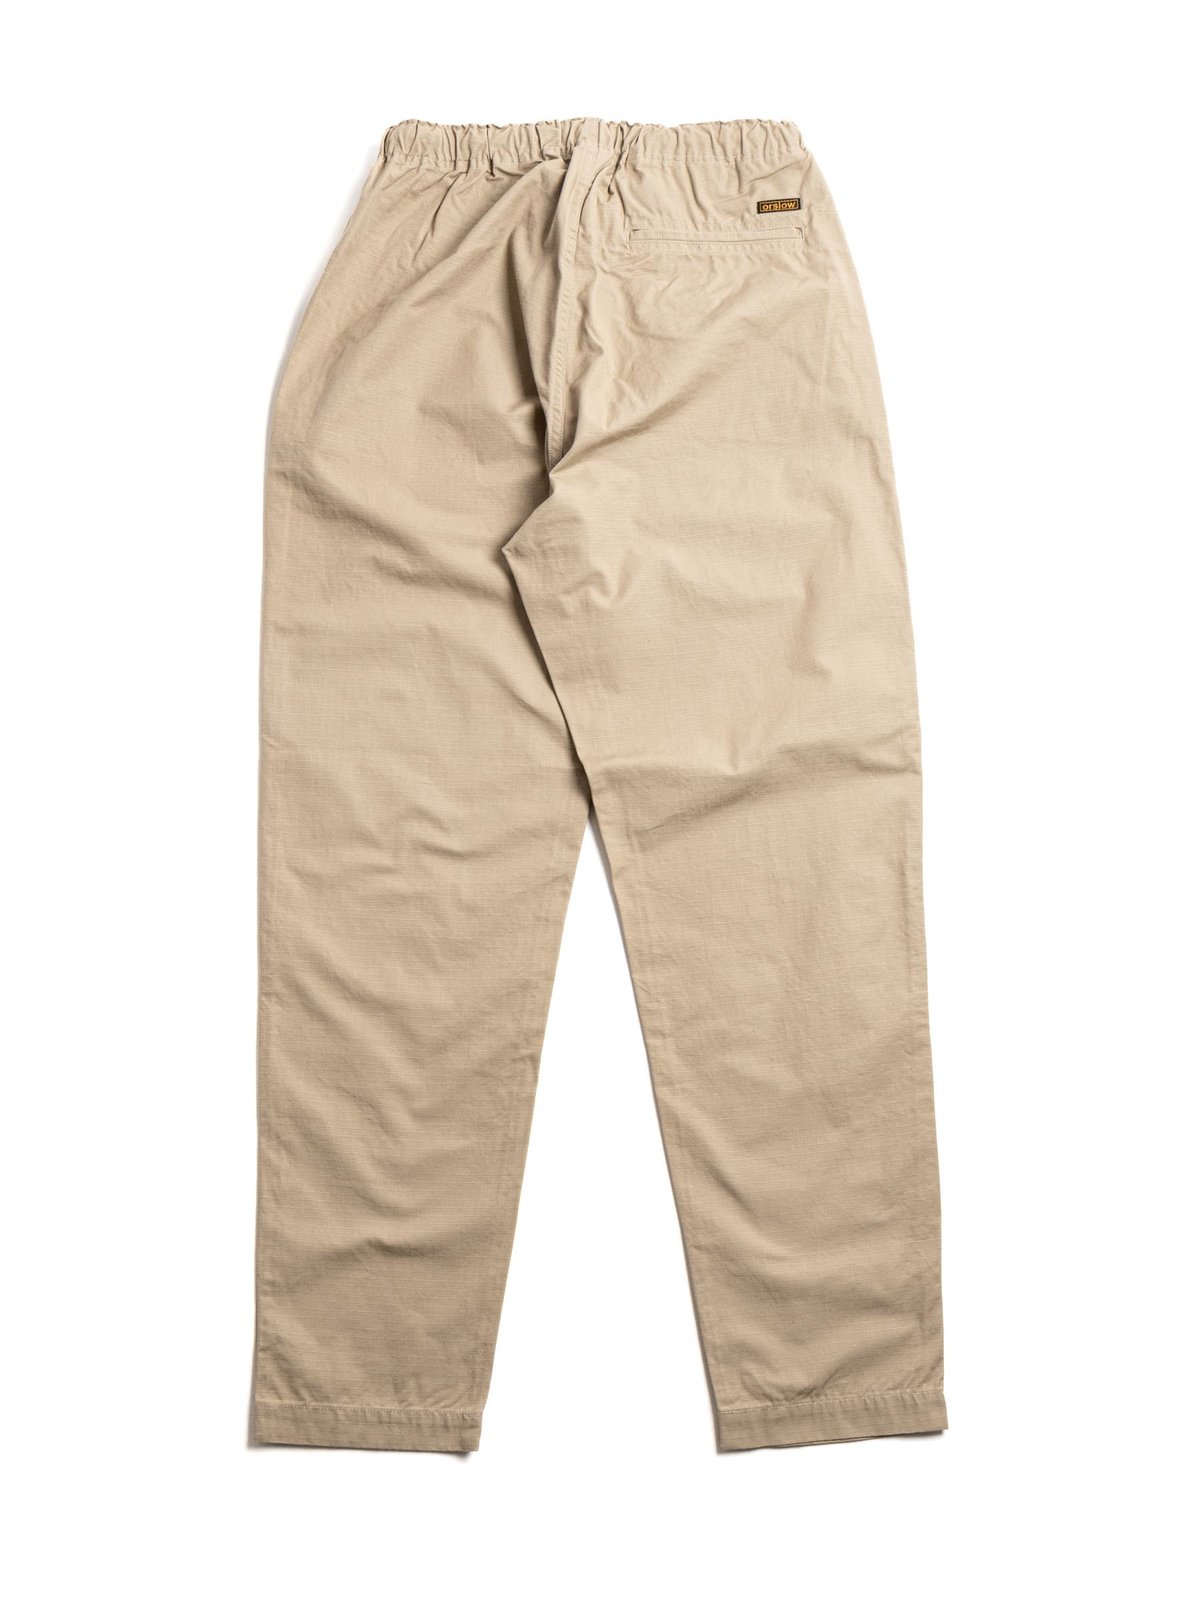 NEW YORKER PANT BEIGE RIPSTOP by orSlow – The Bureau Belfast - The ...